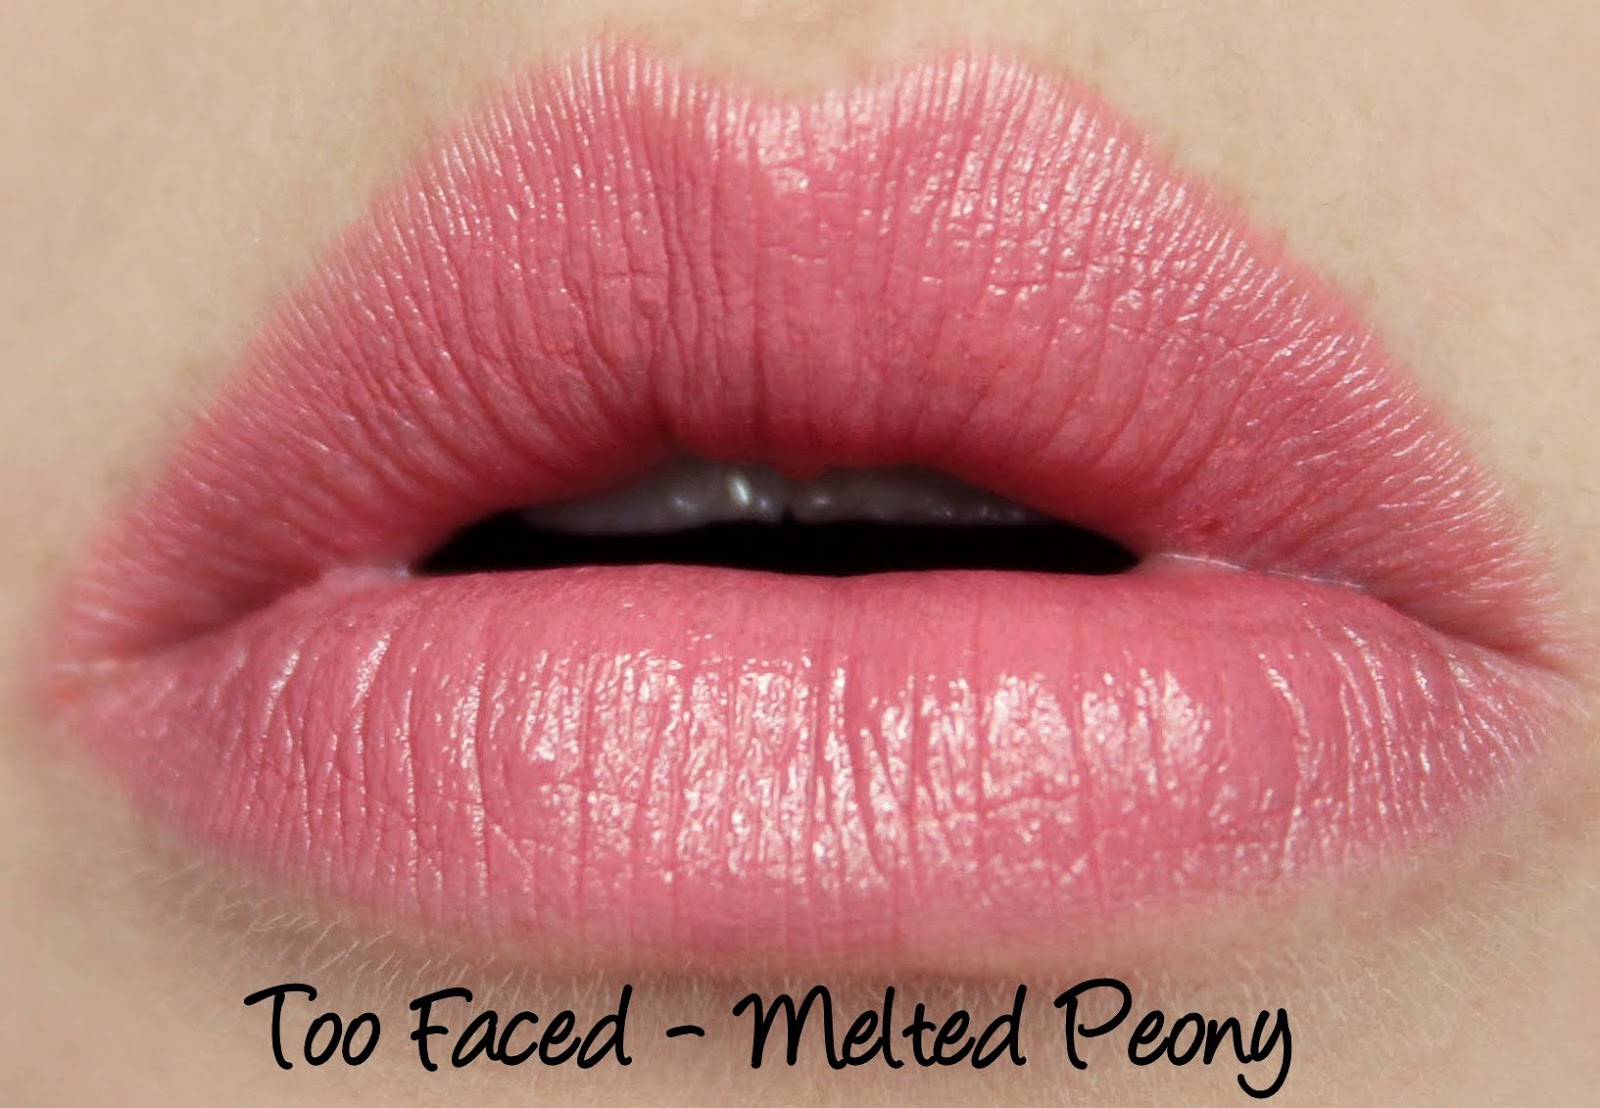 Too Faced Melted Peony Swatches & Review